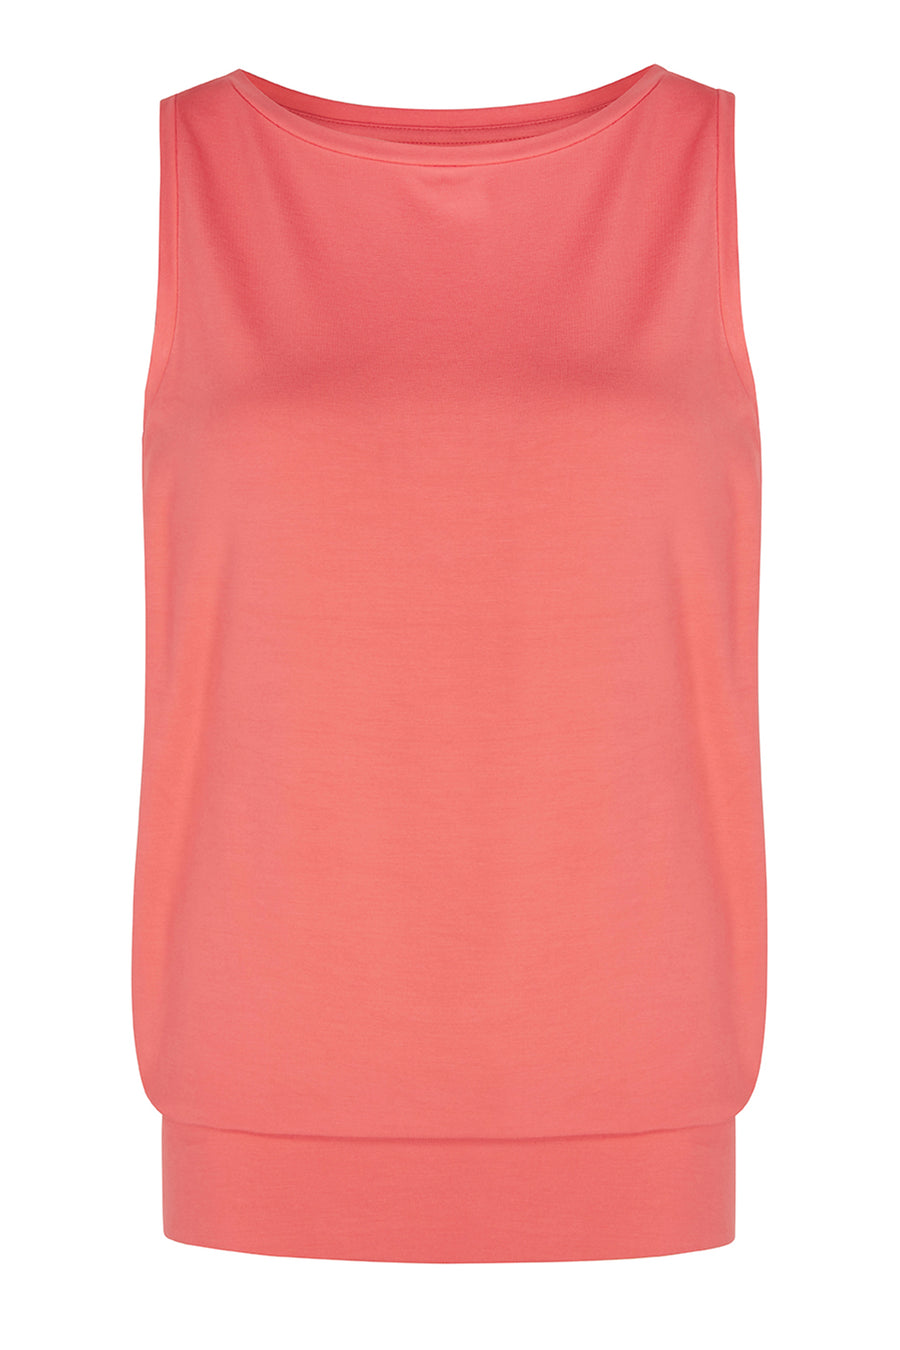 Smooth You Vest - Coral